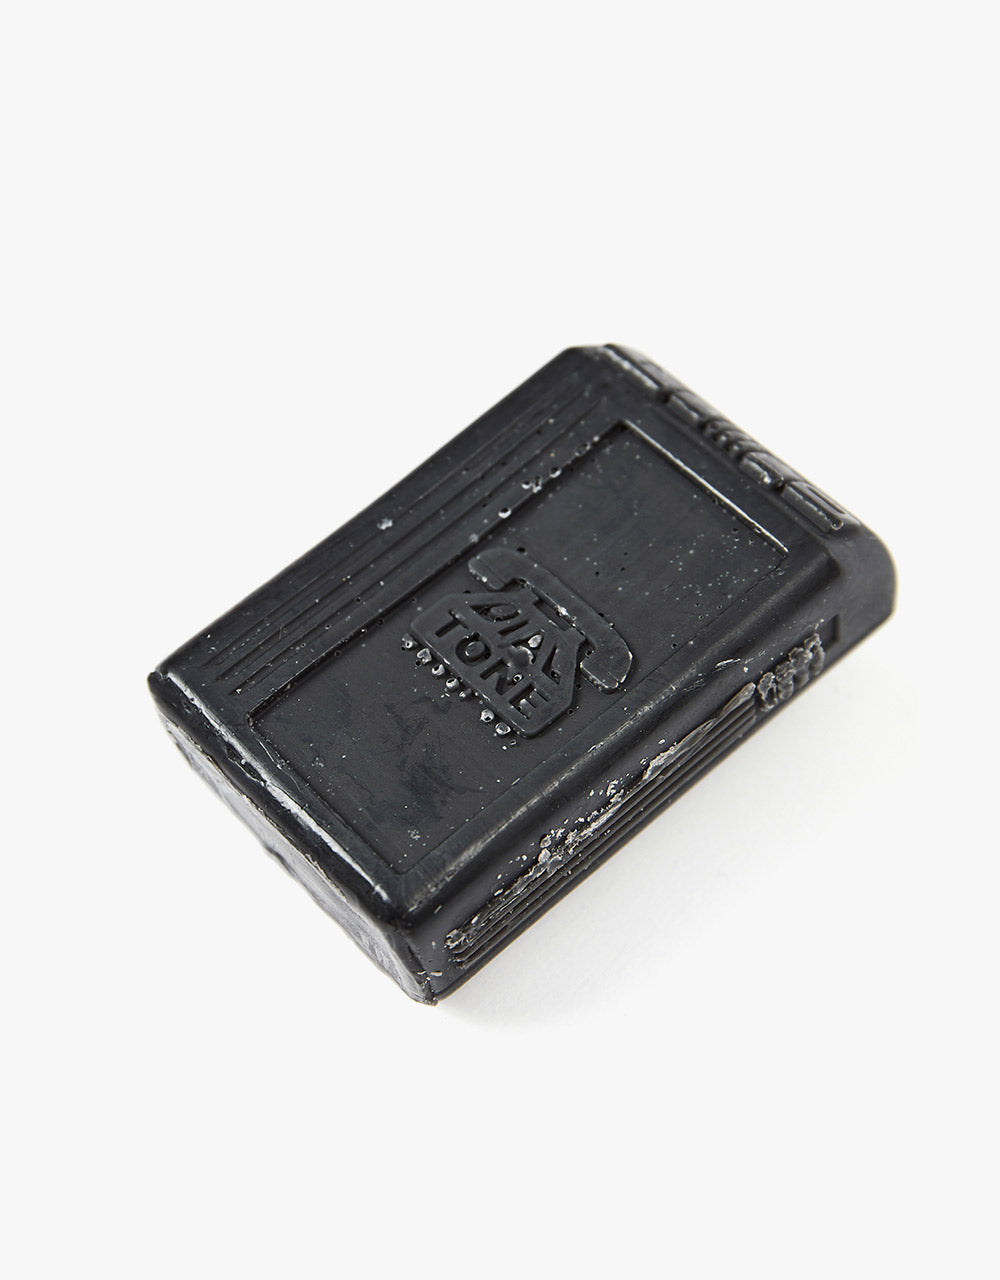 Dial Tone Pager Wax Block